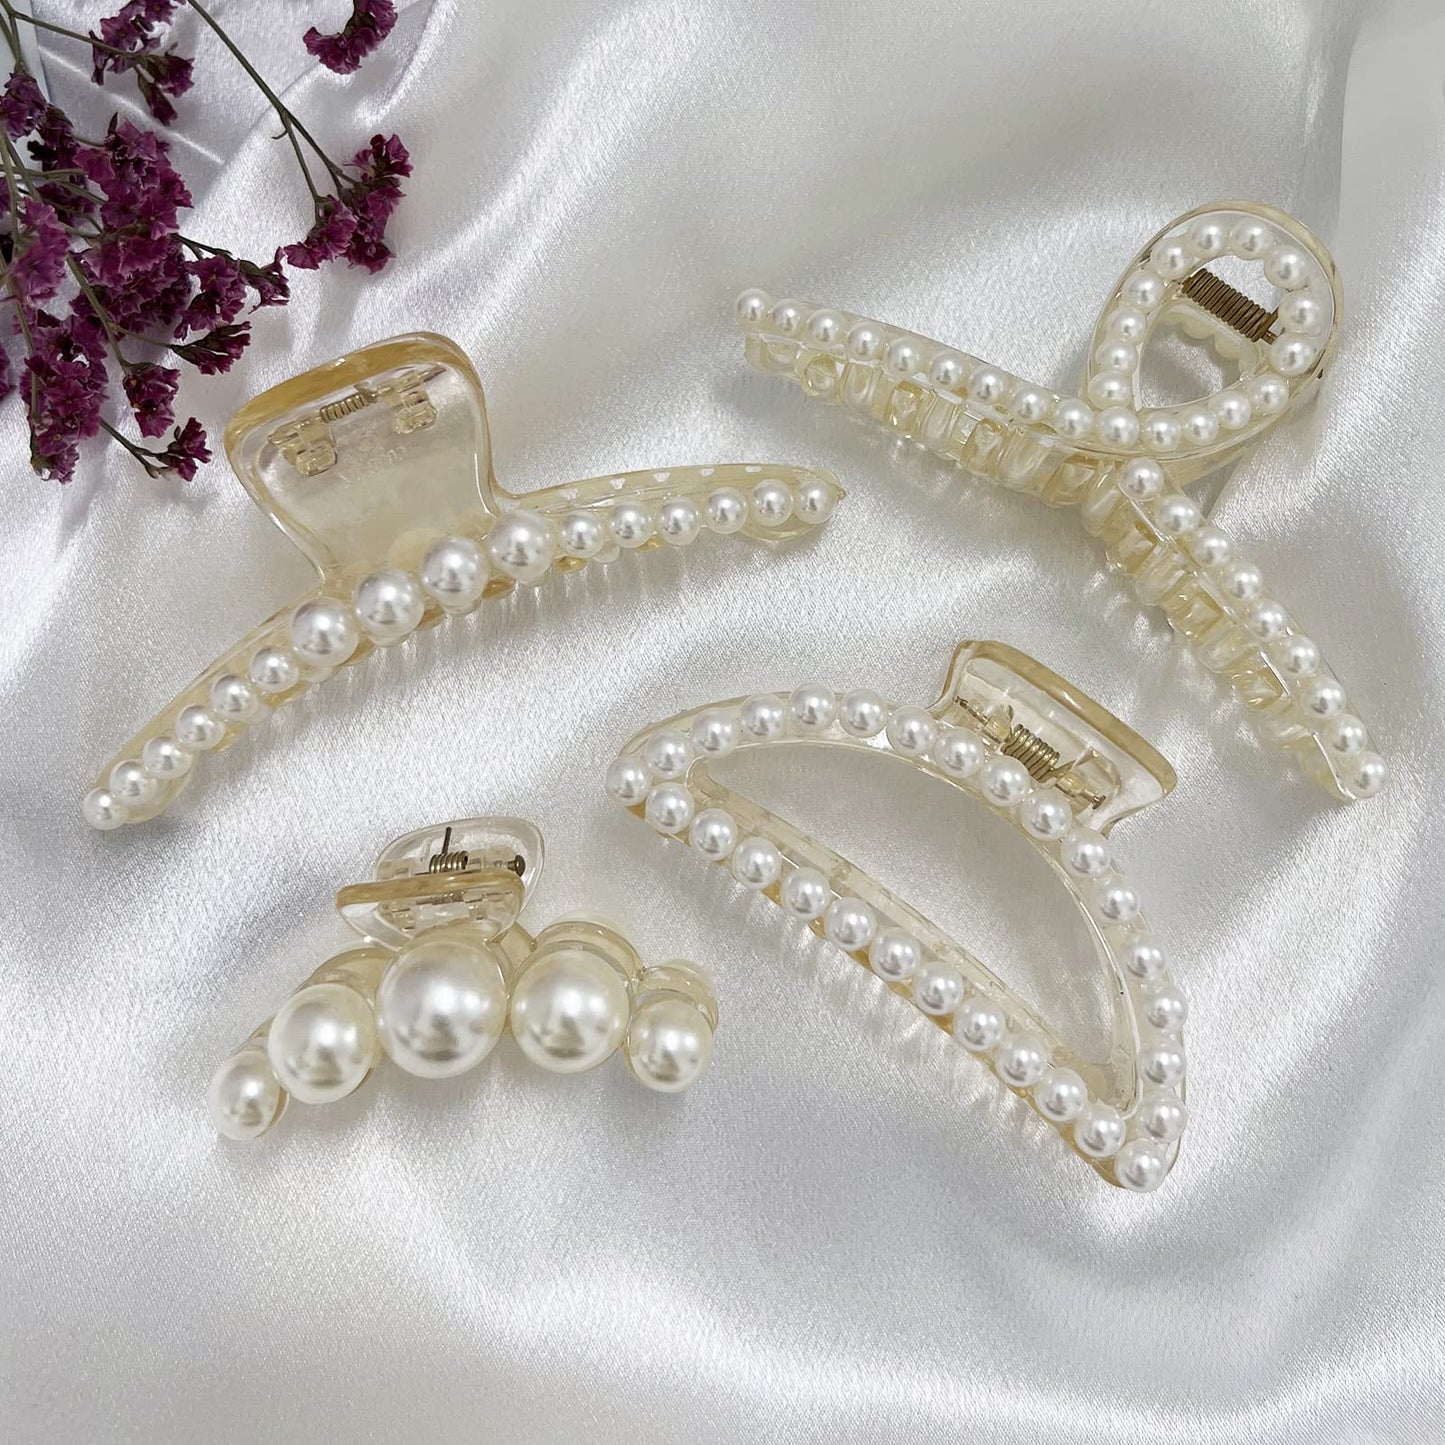 Mehayi 4 PCS Large Pearl Hair Claw Clips for Women Girls, Hair Barrette Clamps for Thick Thin Hair, Fashion Hair Accessories Headwear Styling Tools for Party Wedding